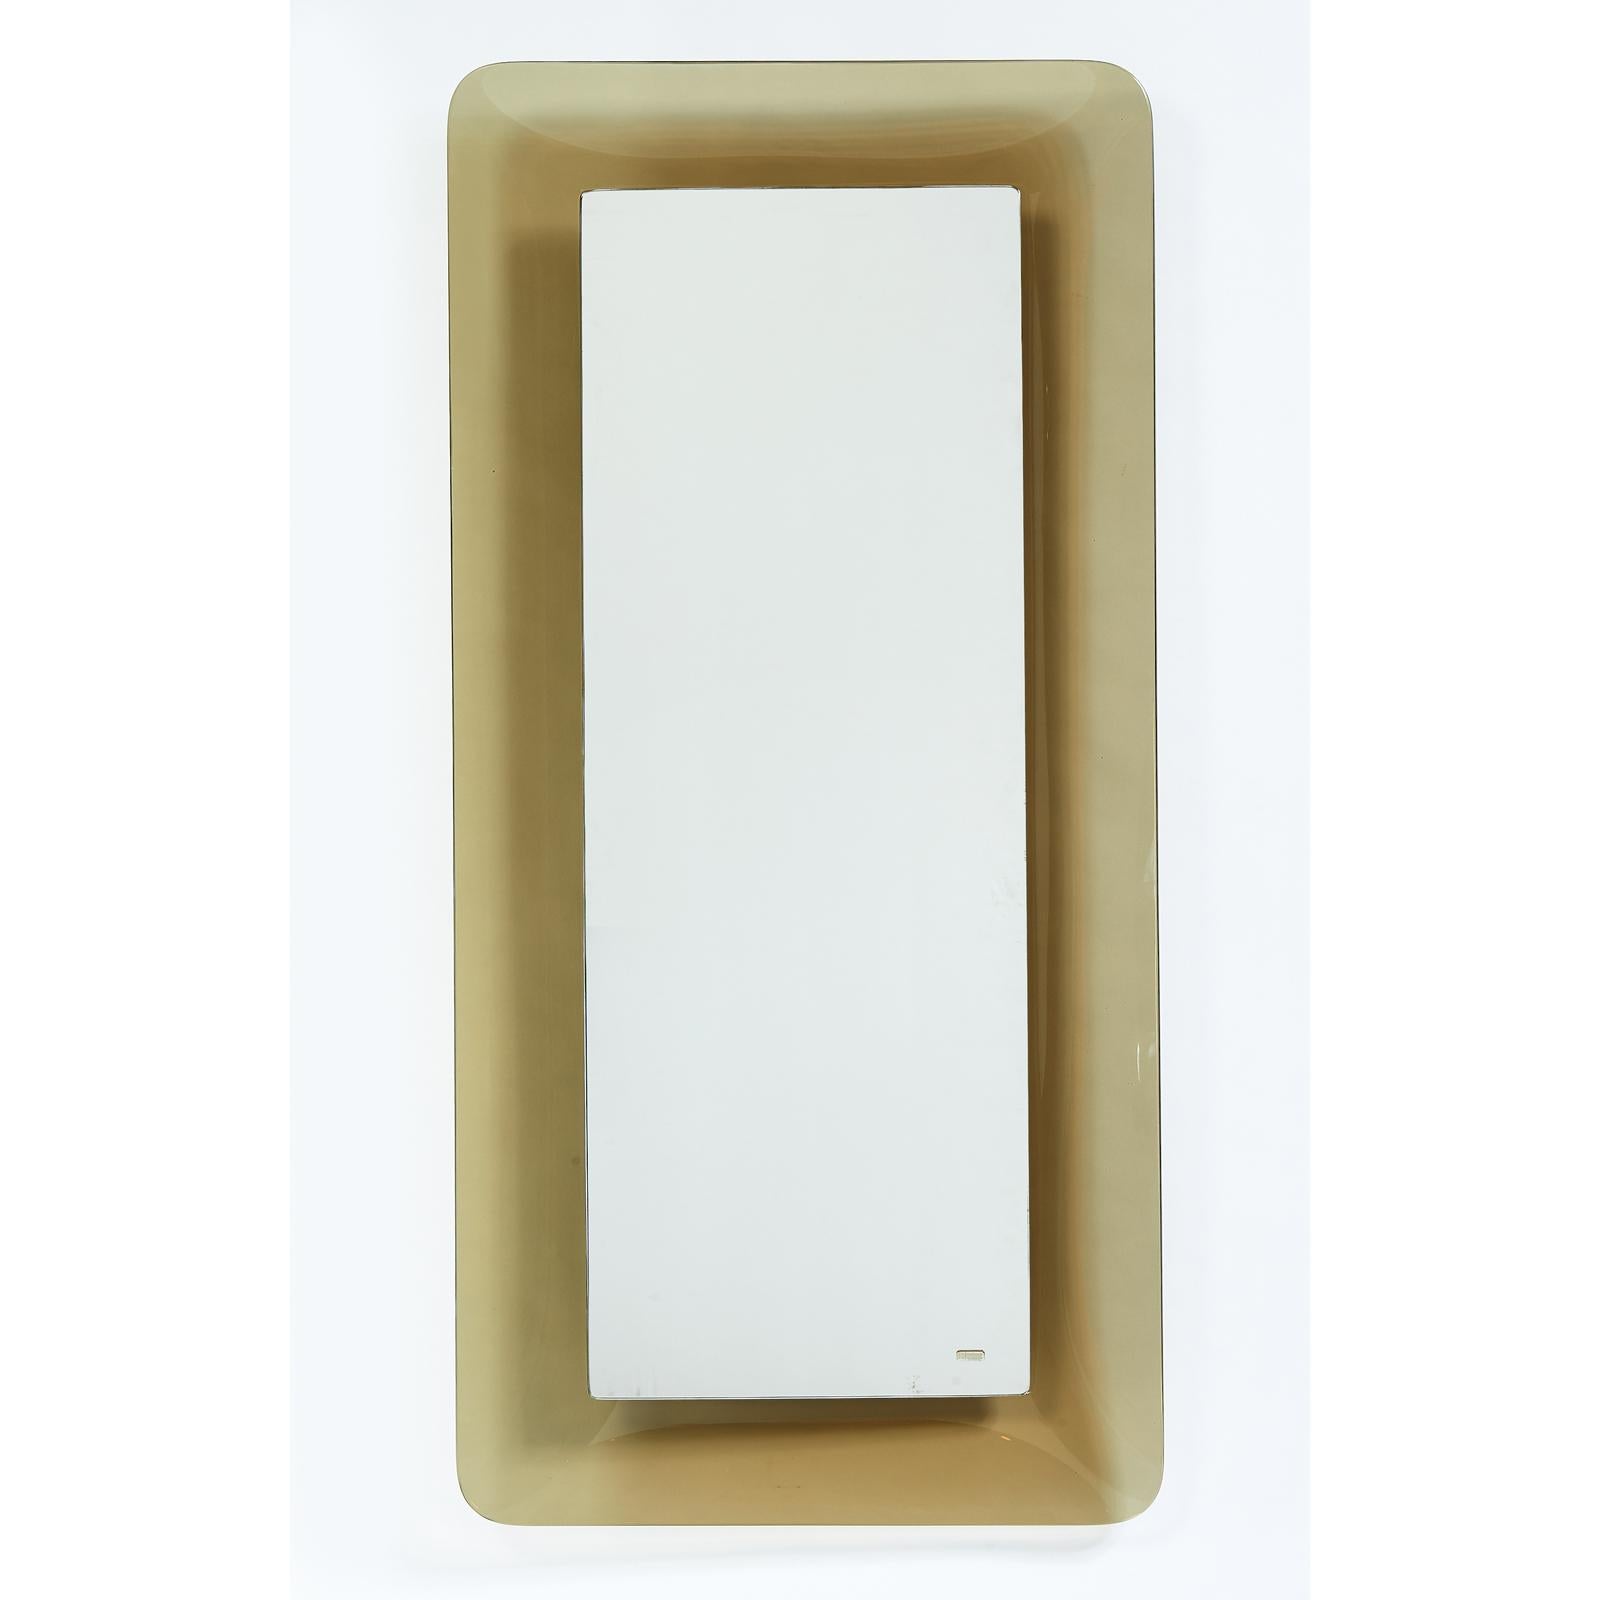 Max Ingrand for Fontana Arte
Elegant, slender rectangular mirror with rounded corners, curved colored glass
Italy, 1950s
Fontana Arte, Cristallo St Gobain label on mirror
Dimensions: 43.5 H x 20 W x 2.5 D.
   